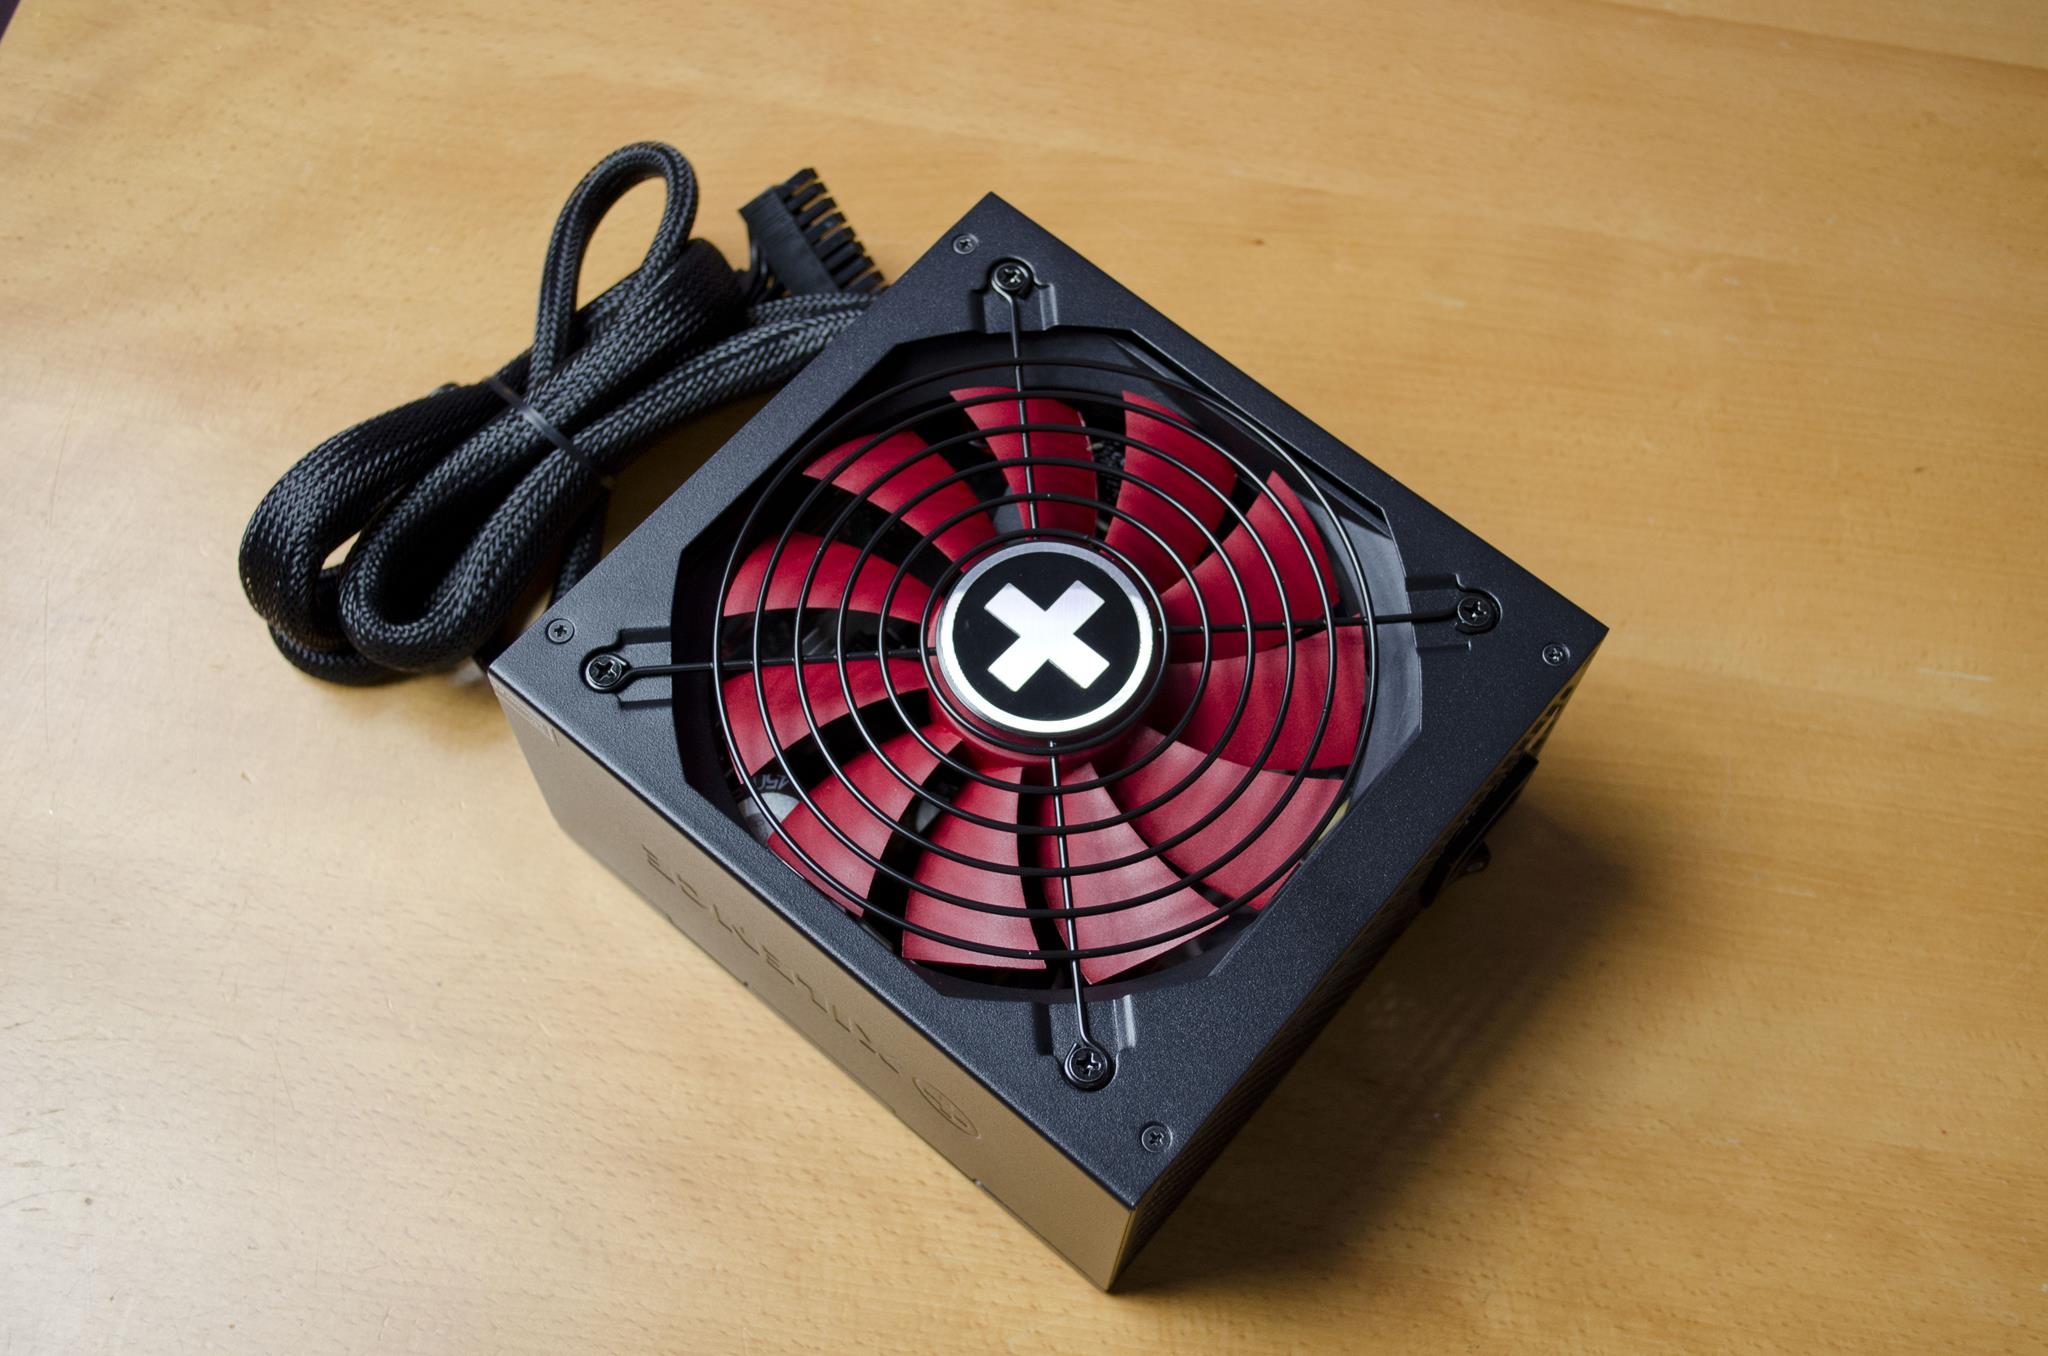 Xilence Performance X Series 850W Power Supply Overview